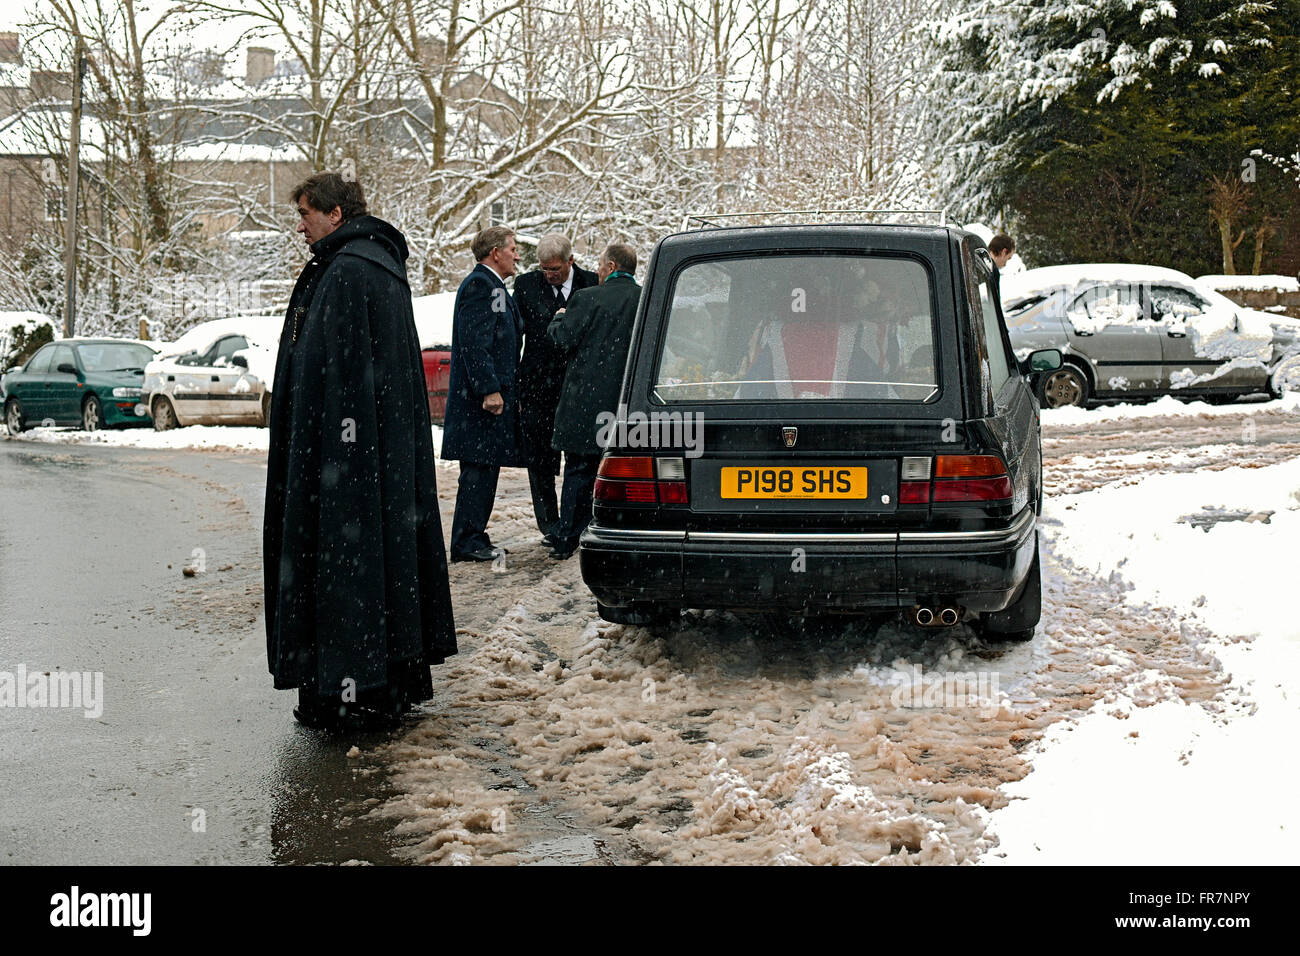 A priest in a long black cloak waits in snow by a hearse following a funeral in Wales Stock Photo